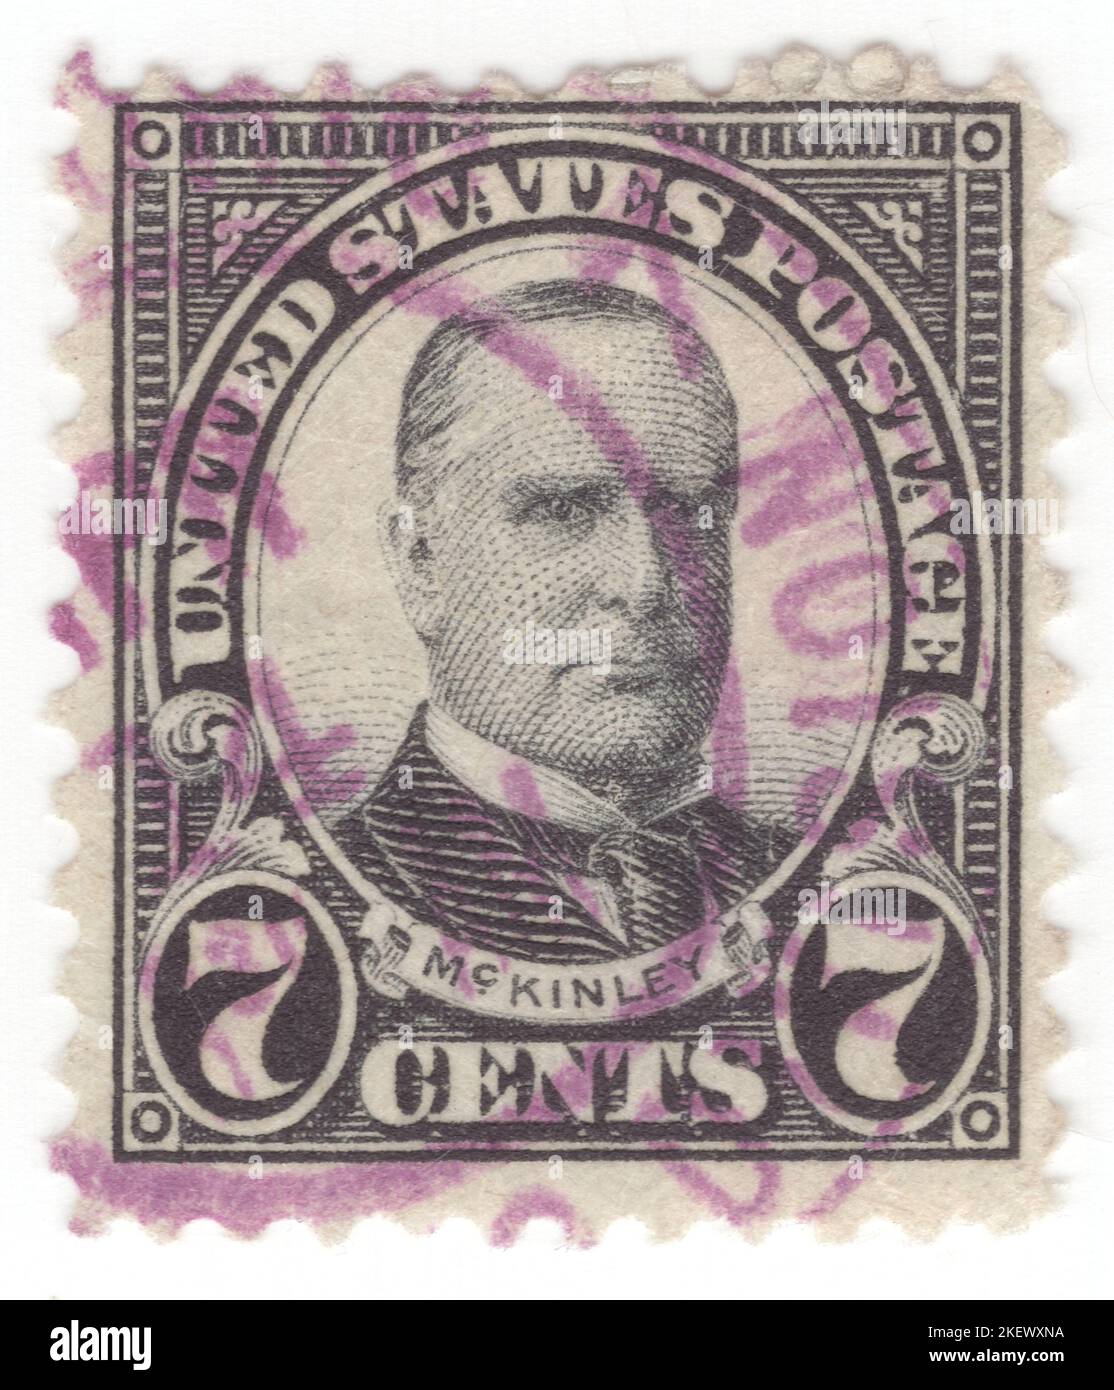 USA - 1923: An 7 cents black postage stamp depicting portrait of William McKinley. 25th president of the United States, serving from 1897 until his assassination in 1901. As a politician he led a realignment that made his Republican Party largely dominant in the industrial states and nationwide until the 1930s. He presided over victory in the Spanish–American War of 1898; gained control of Hawaii, Puerto Rico, the Philippines and Cuba; restored prosperity after a deep depression; rejected the inflationary monetary policy of free silver, keeping the nation on the gold standard Stock Photo